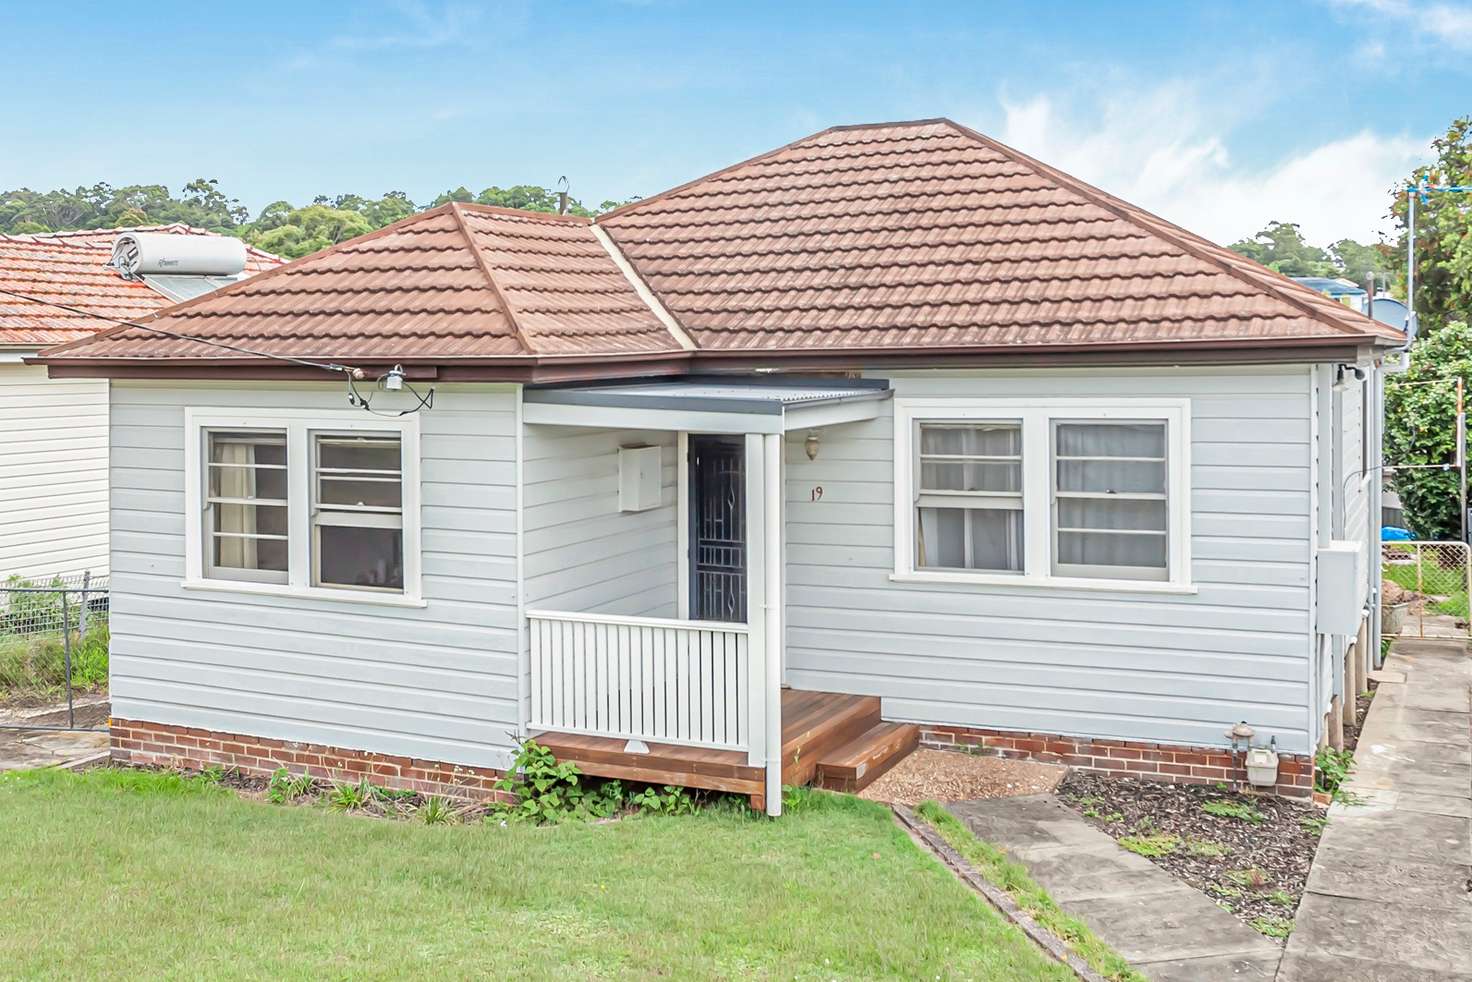 Main view of Homely house listing, 19 Delauret Square, Waratah West NSW 2298